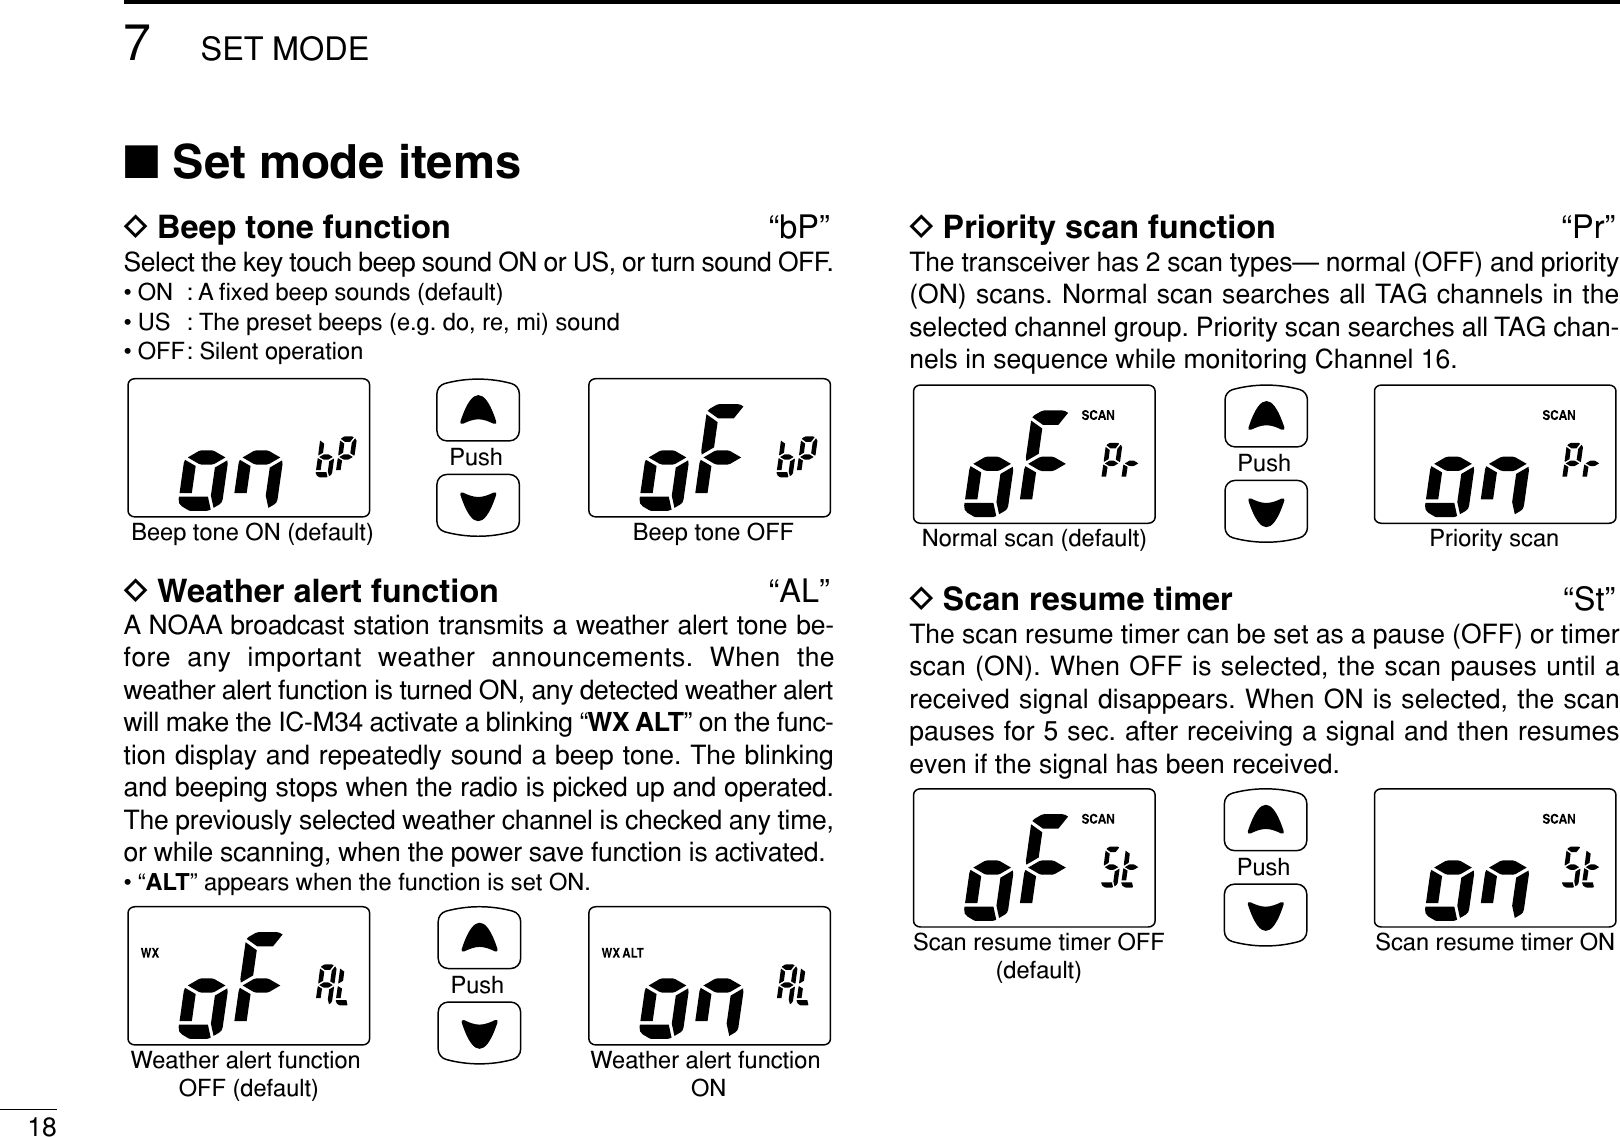 187SET MODE■Set mode itemsDBeep tone function “bP”Select the key touch beep sound ON or US, or turn sound OFF.• ON : A ﬁxed beep sounds (default)• US : The preset beeps (e.g. do, re, mi) sound• OFF: Silent operation DWeather alert function “AL”A NOAA broadcast station transmits a weather alert tone be-fore any important weather announcements. When theweather alert function is turned ON, any detected weather alertwill make the IC-M34 activate a blinking “WX ALT” on the func-tion display and repeatedly sound a beep tone. The blinkingand beeping stops when the radio is picked up and operated.The previously selected weather channel is checked any time,or while scanning, when the power save function is activated.•“ALT” appears when the function is set ON.DPriority scan function “Pr”The transceiver has 2 scan types— normal (OFF) and priority(ON) scans. Normal scan searches all TAG channels in theselected channel group. Priority scan searches all TAG chan-nels in sequence while monitoring Channel 16.DScan resume timer “St”The scan resume timer can be set as a pause (OFF) or timerscan (ON). When OFF is selected, the scan pauses until areceived signal disappears. When ON is selected, the scanpauses for 5 sec. after receiving a signal and then resumeseven if the signal has been received.PushScan resume timer OFF(default)Scan resume timer ONPushNormal scan (default) Priority scanPushWeather alert function OFF (default)Weather alert function ONPushBeep tone ON (default) Beep tone OFF